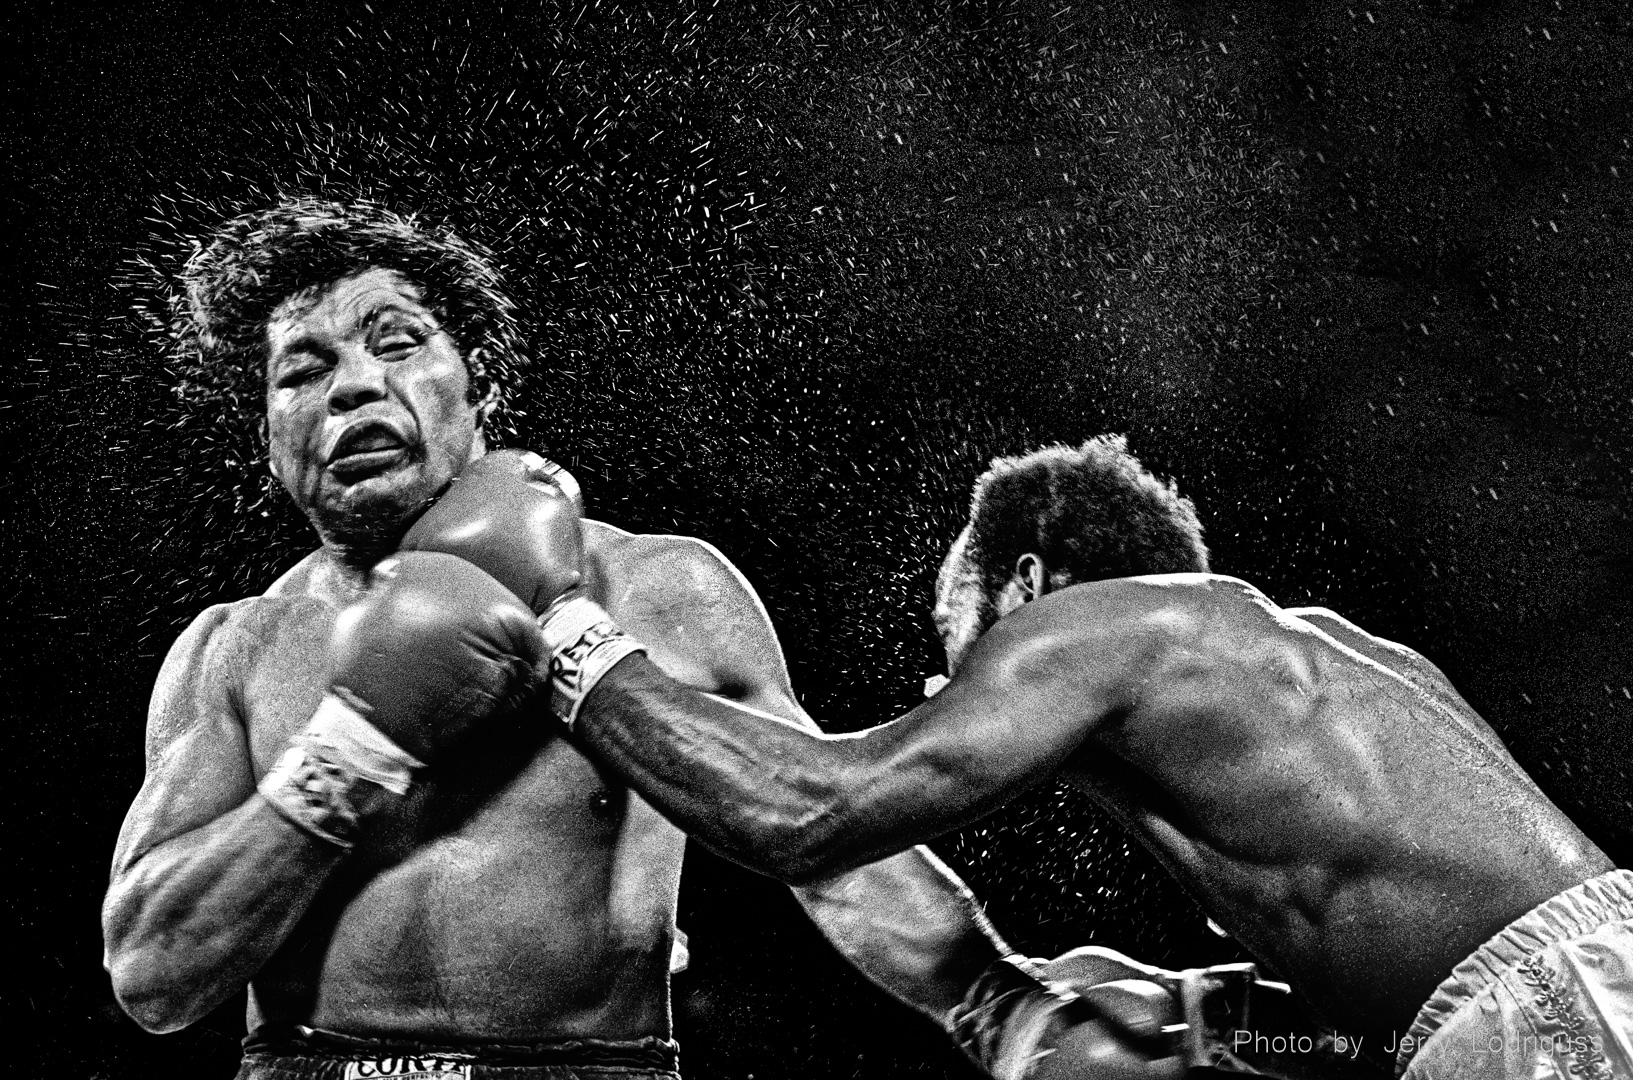 Sweat flies from Victor Galindez' head as Marvin Johnson lands a right in Johnson's victory during their World Boxing Association light-heavyweight championship fight in New Orleans on November 30, 1979 .